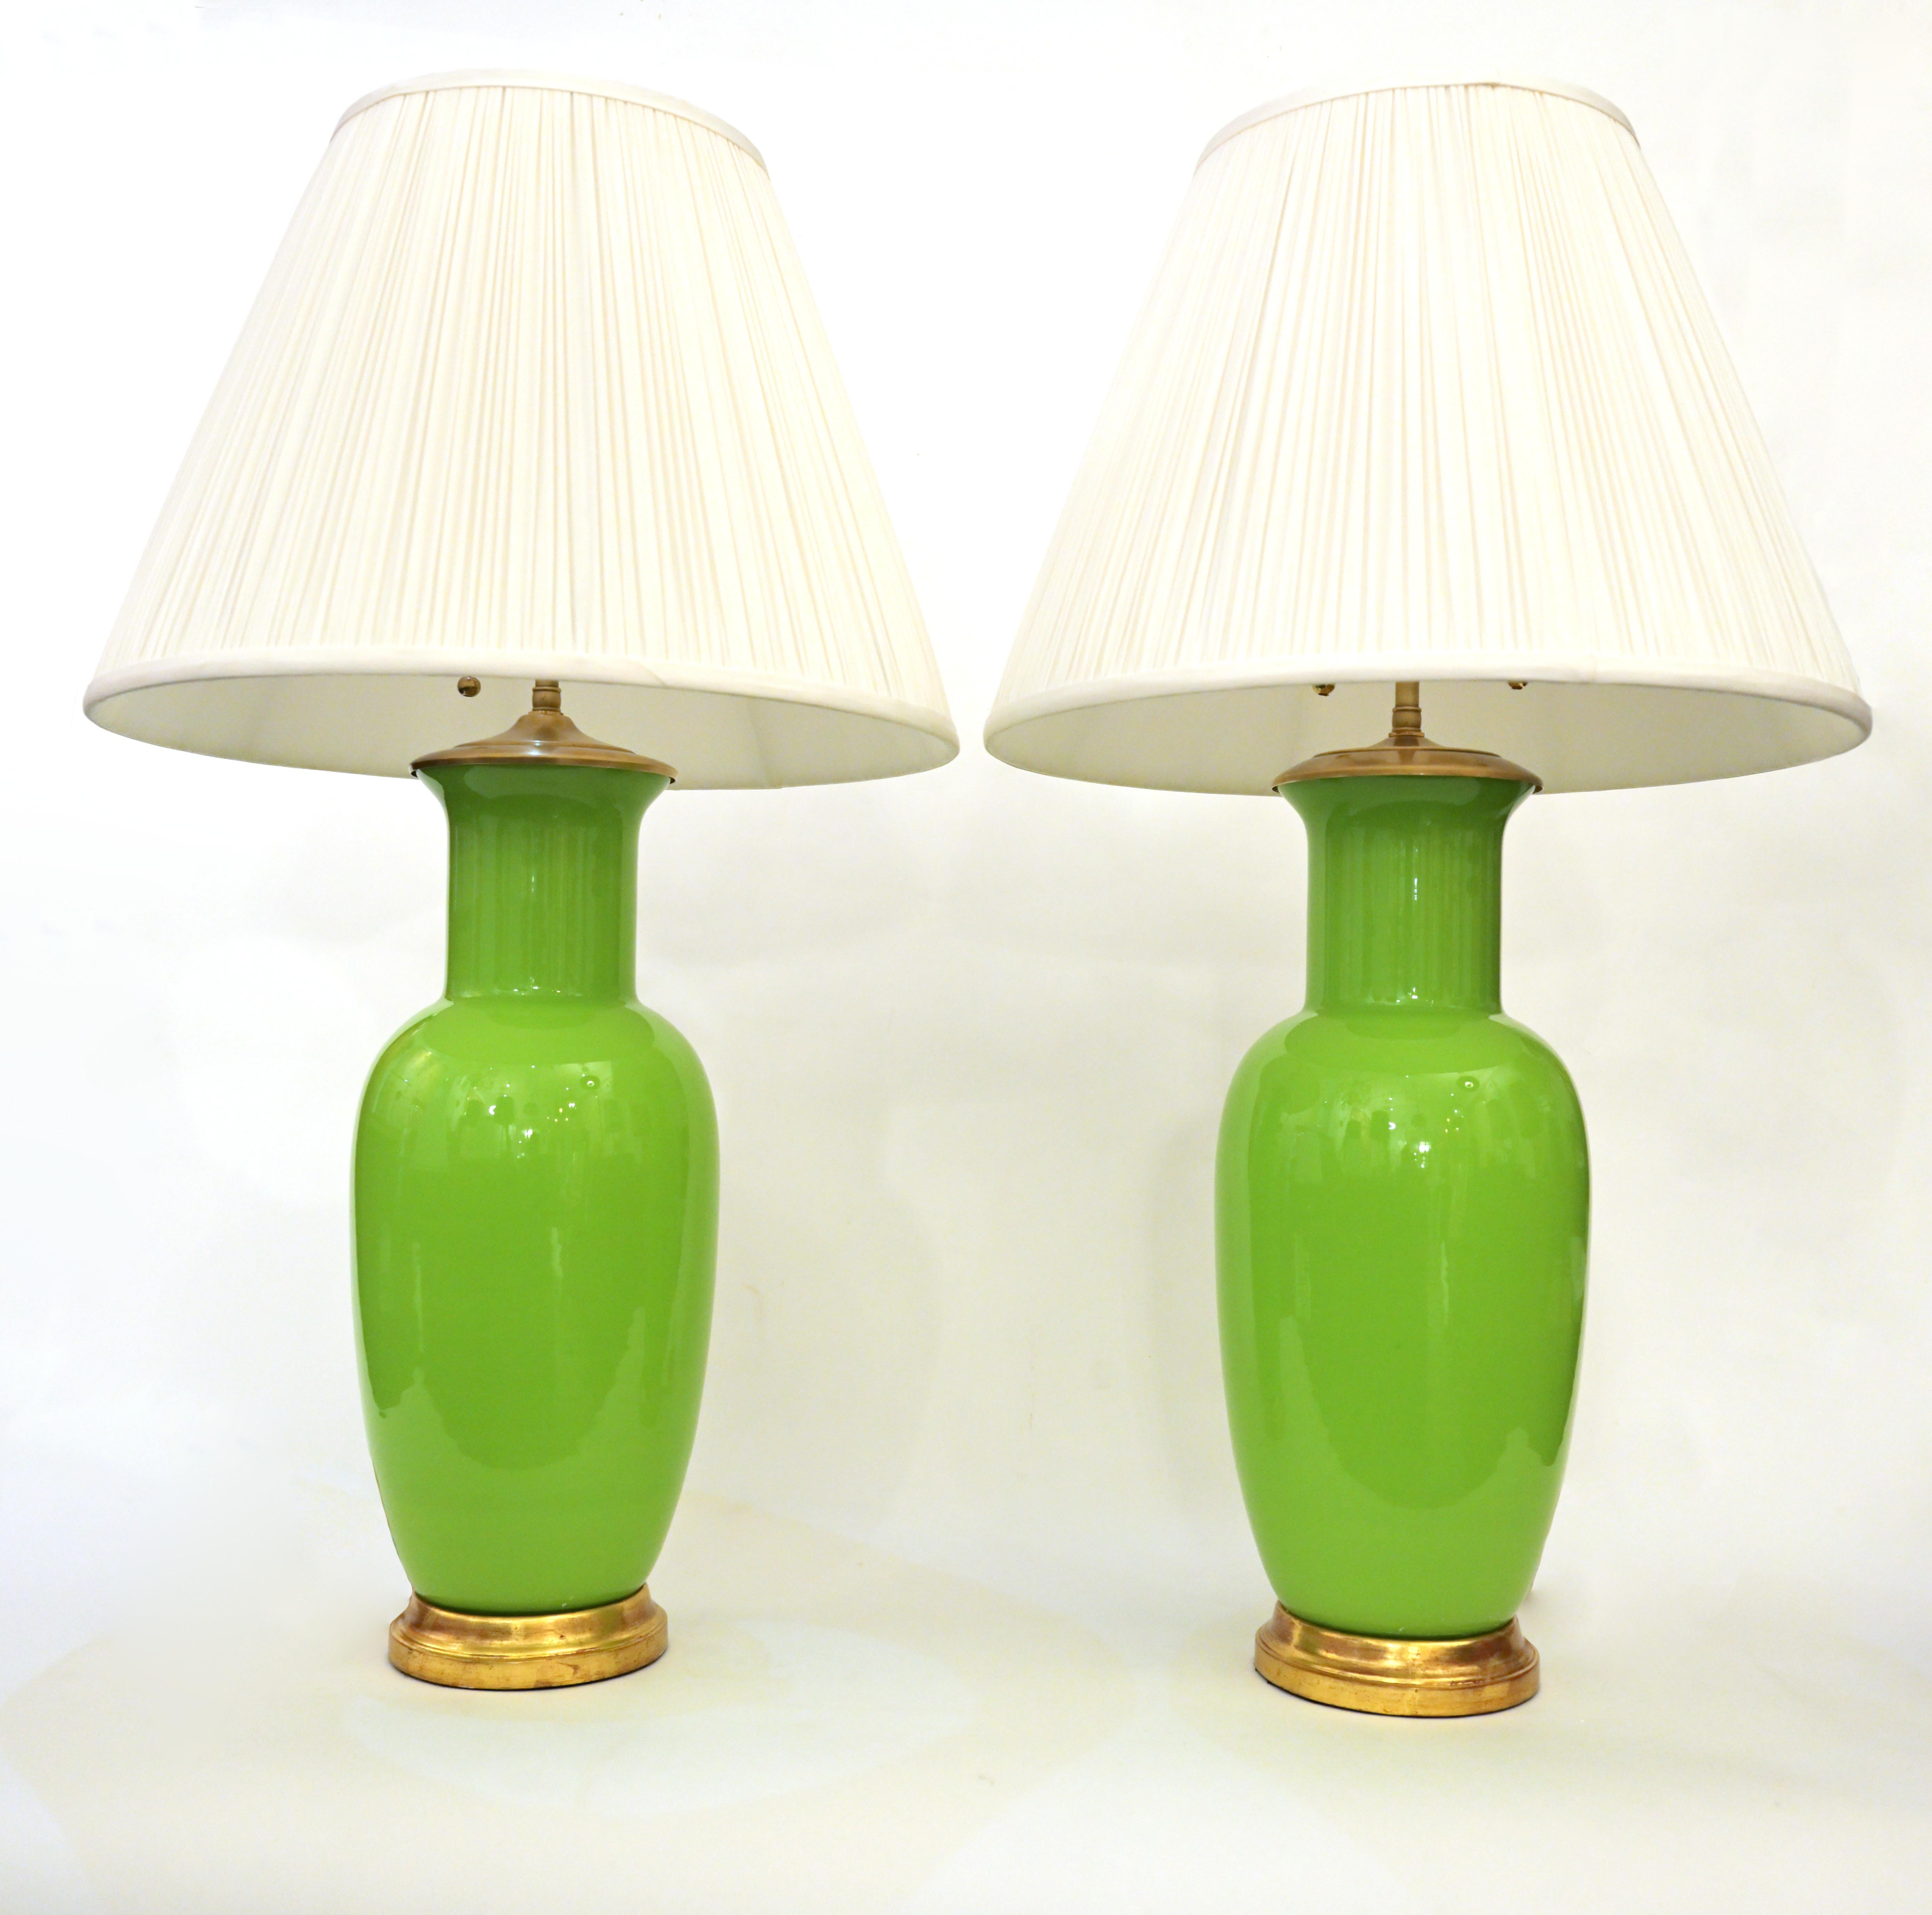 A pair of table lamps made from vintage Murano Glass having gilt wood bases and brass finials with adjustable double cluster, each sockets with 60 watts maximum. Shades are not included.

Center Diameter: 7